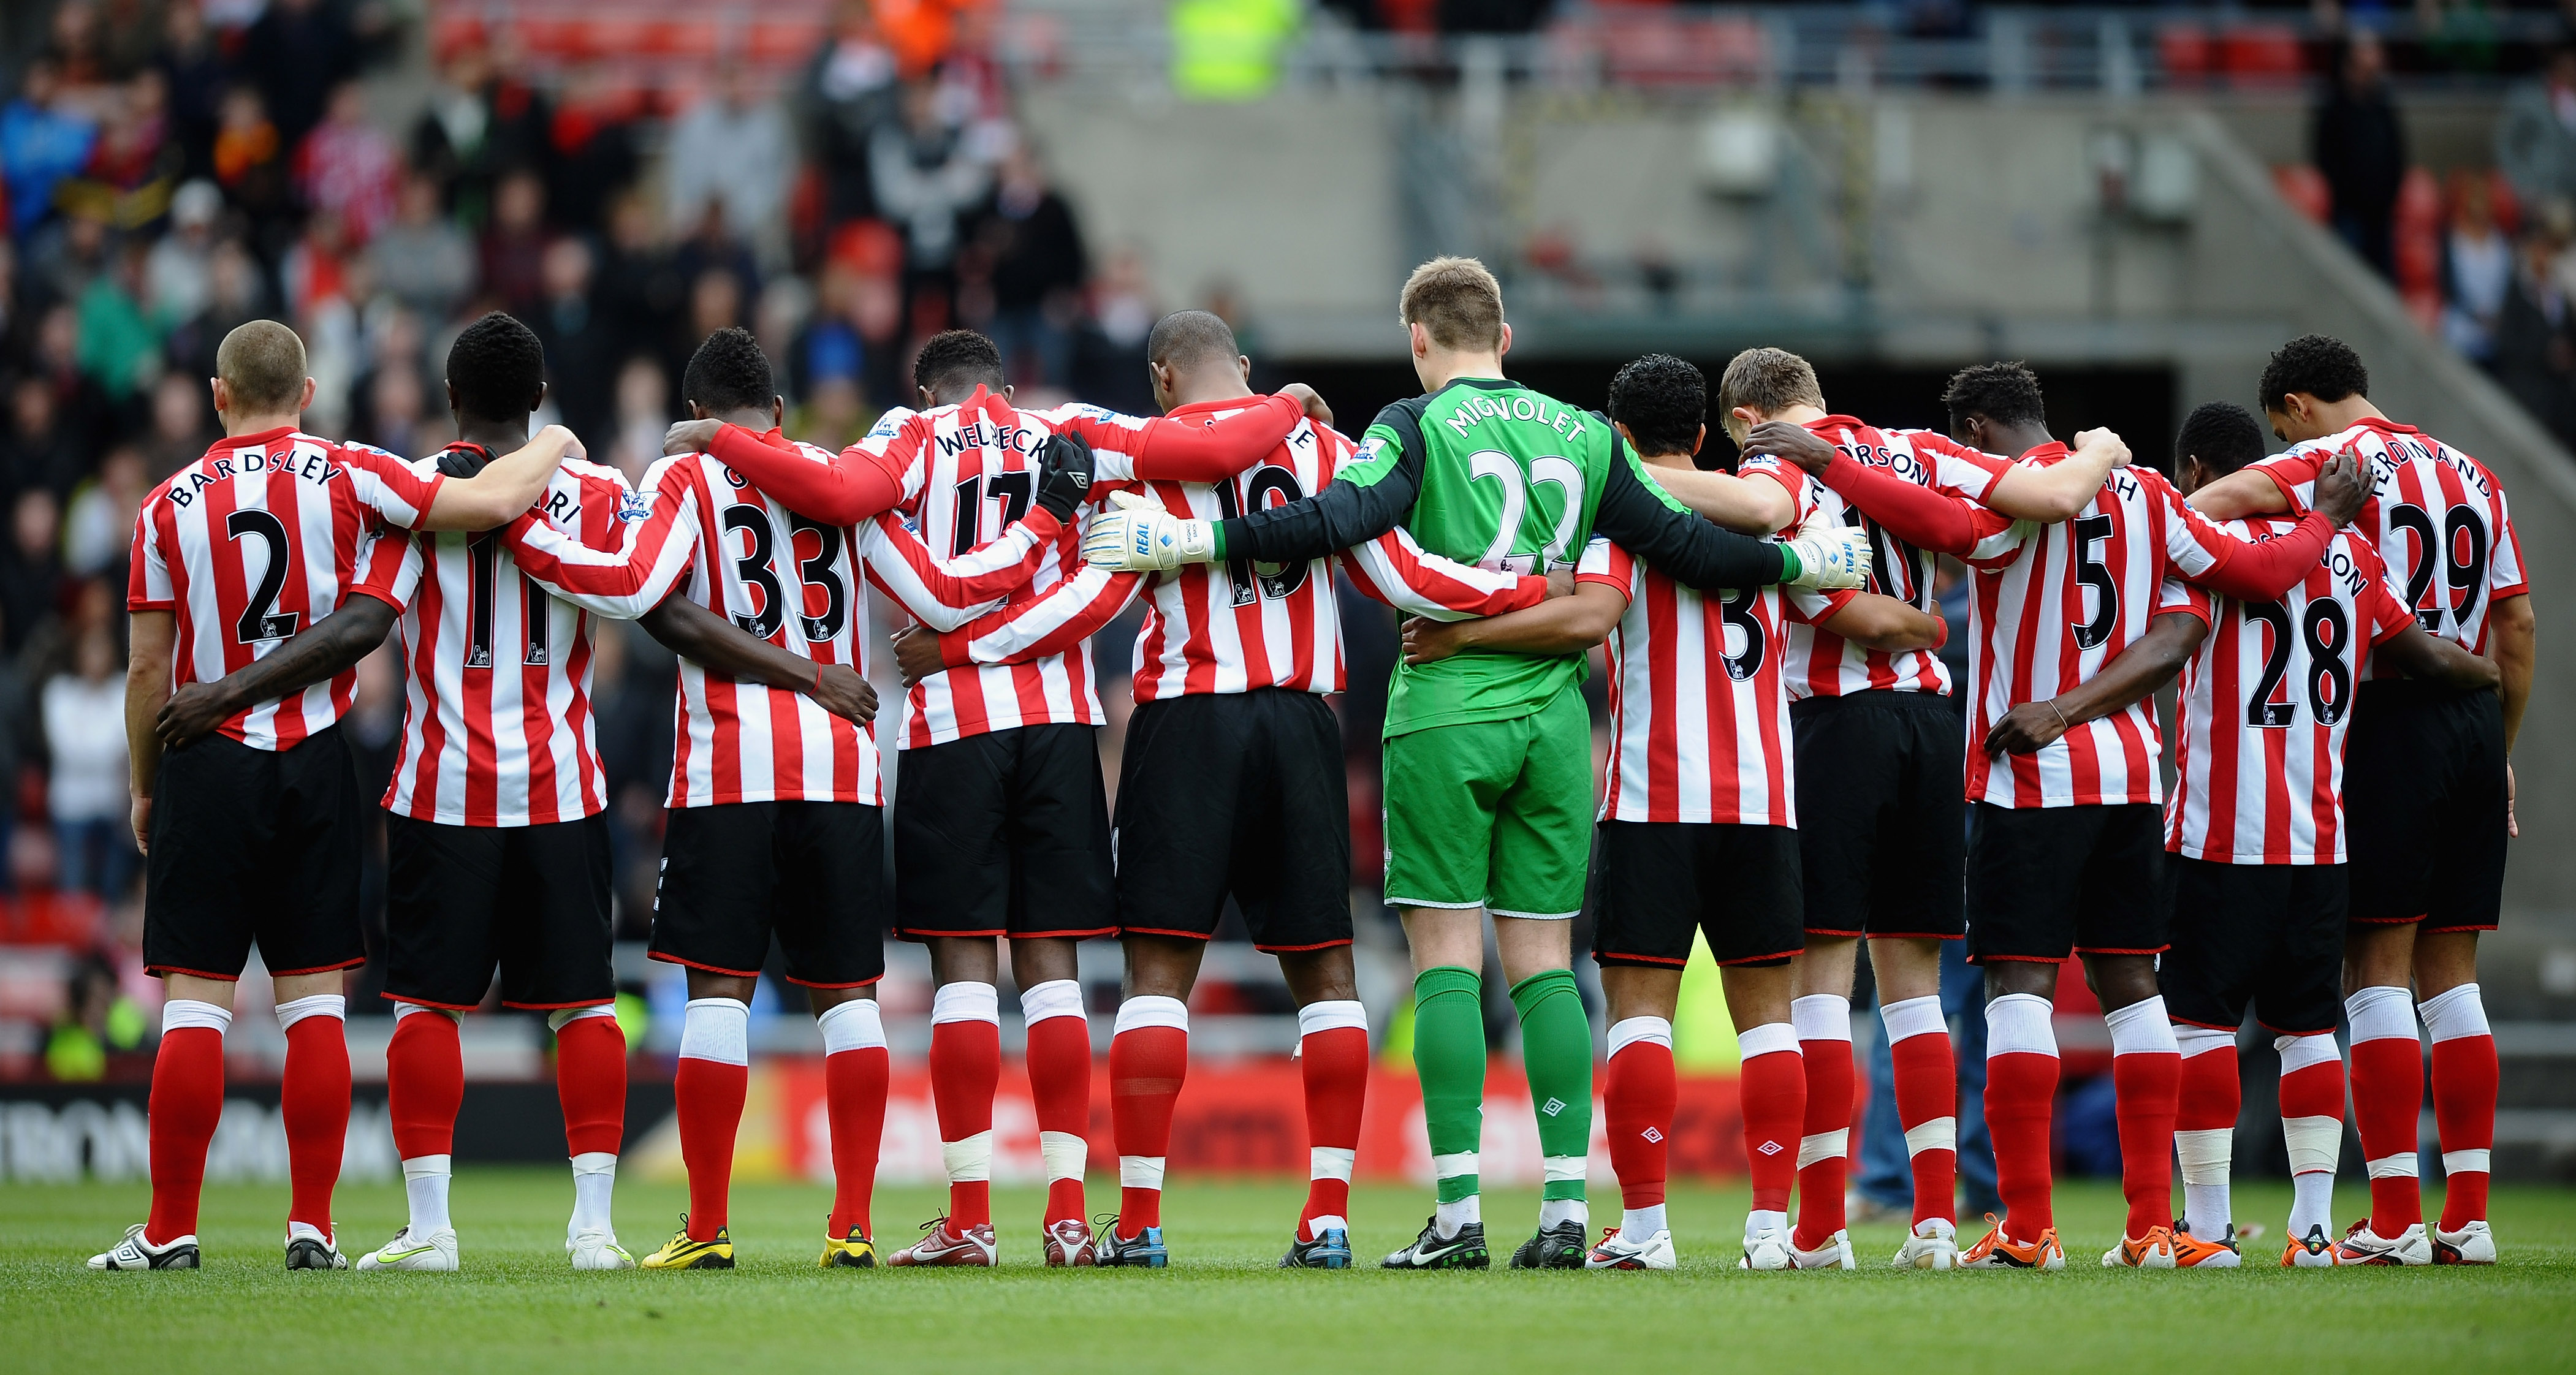 SUNDERLAND, ENGLAND - MARCH 20:  The Sunderland players pay their respects to those who have lost their lives in the Japan Earthquake disaster during the Barclays Premier League match between Sunderland and Liverpool at the Stadium of Light on March 20, 2